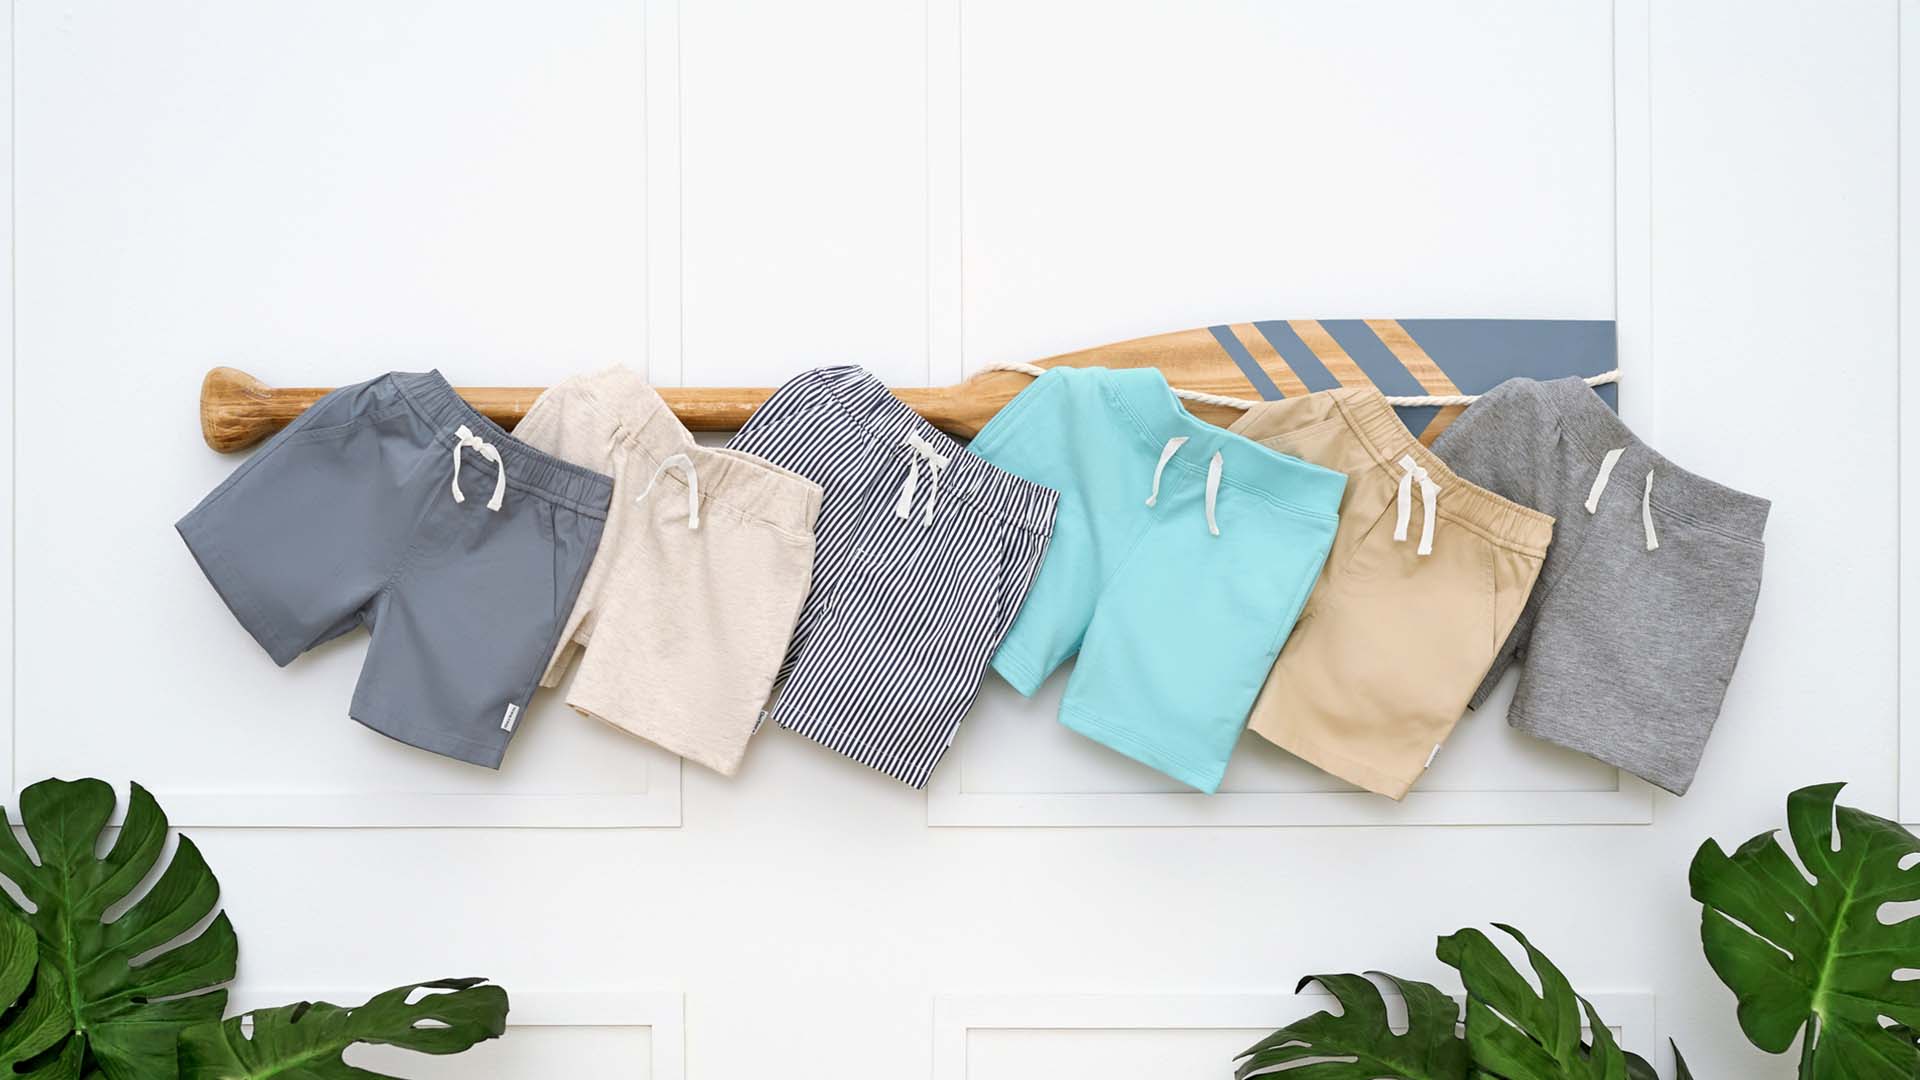 Variety of toddler boy's shorts in different colors and patterns, displayed in a row against a white backdrop with decorative plants on the sides.